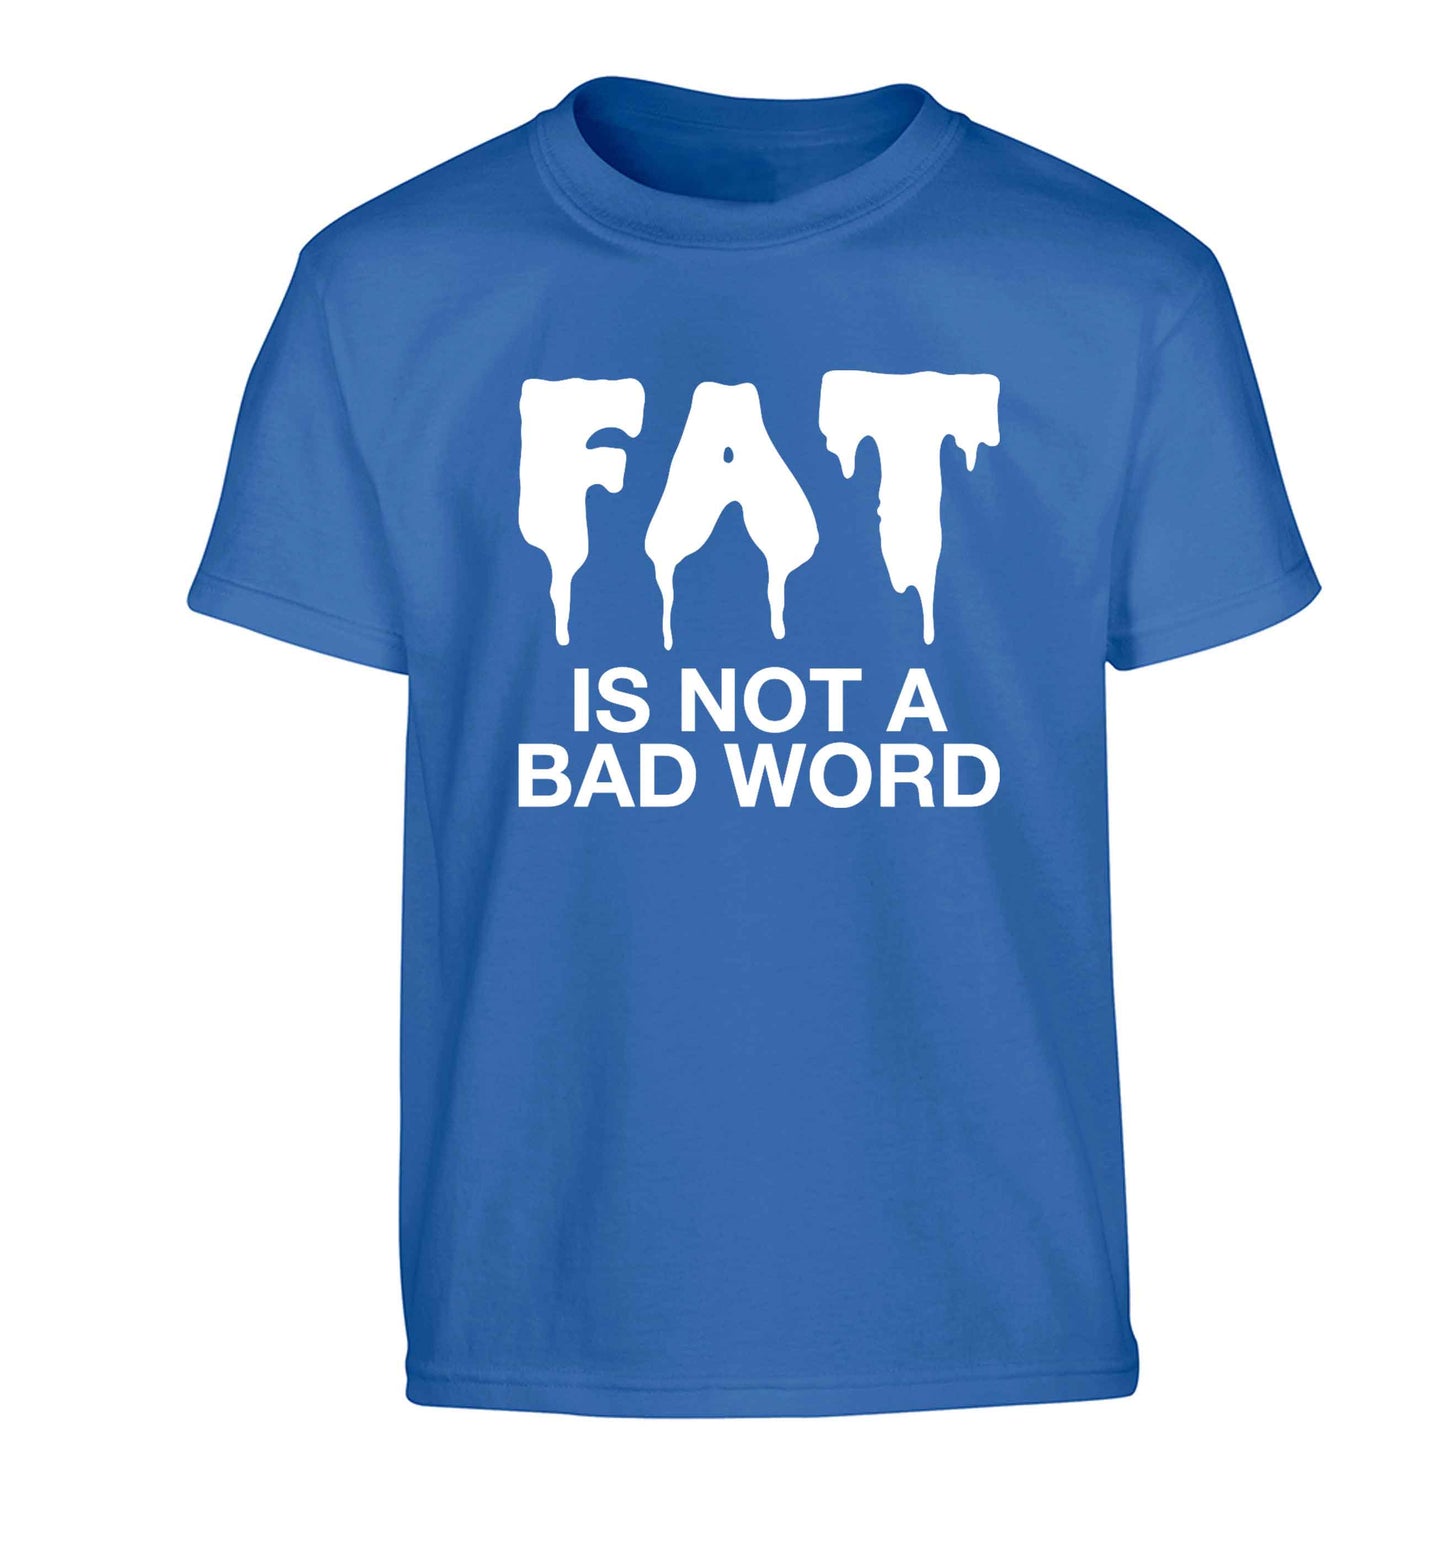 Fat is not a bad word Children's blue Tshirt 12-13 Years